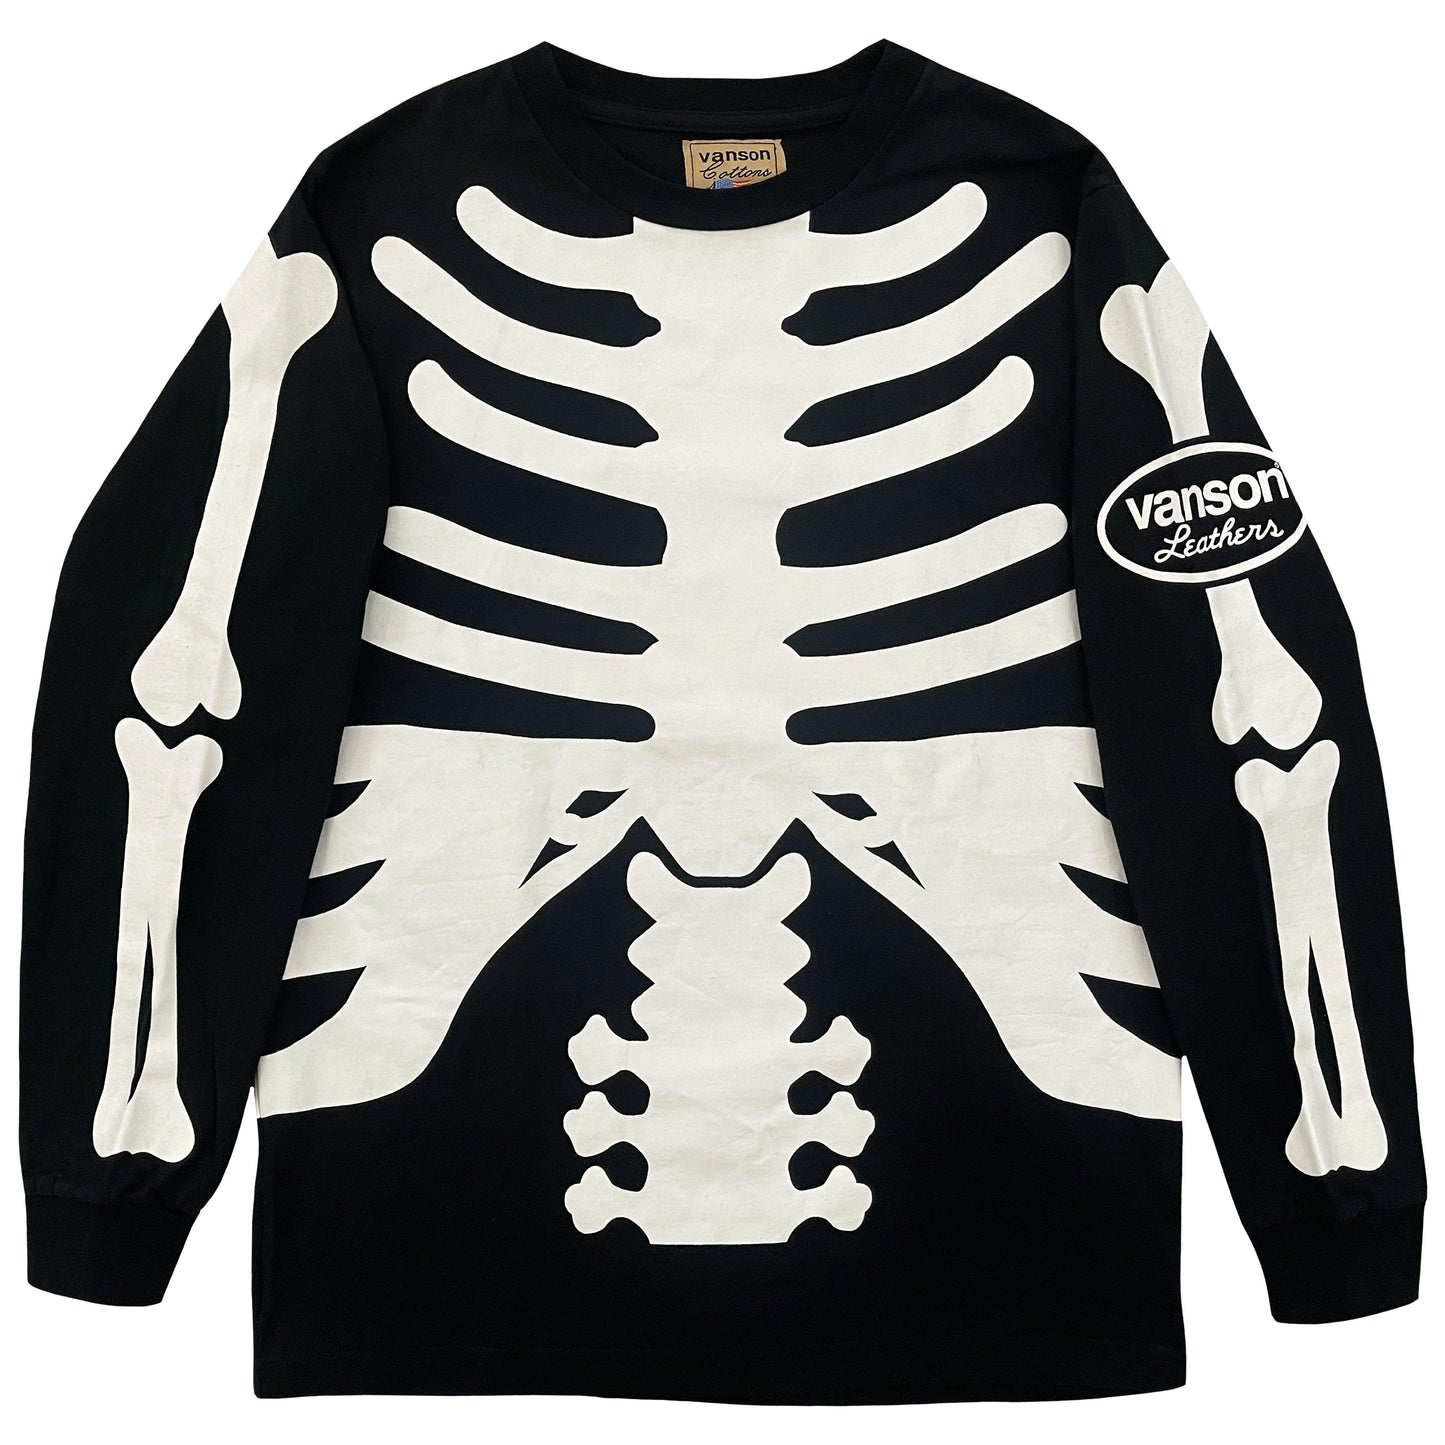 Vanson Leathers Skeleton Long Sleeve T-Shirt - Known Source